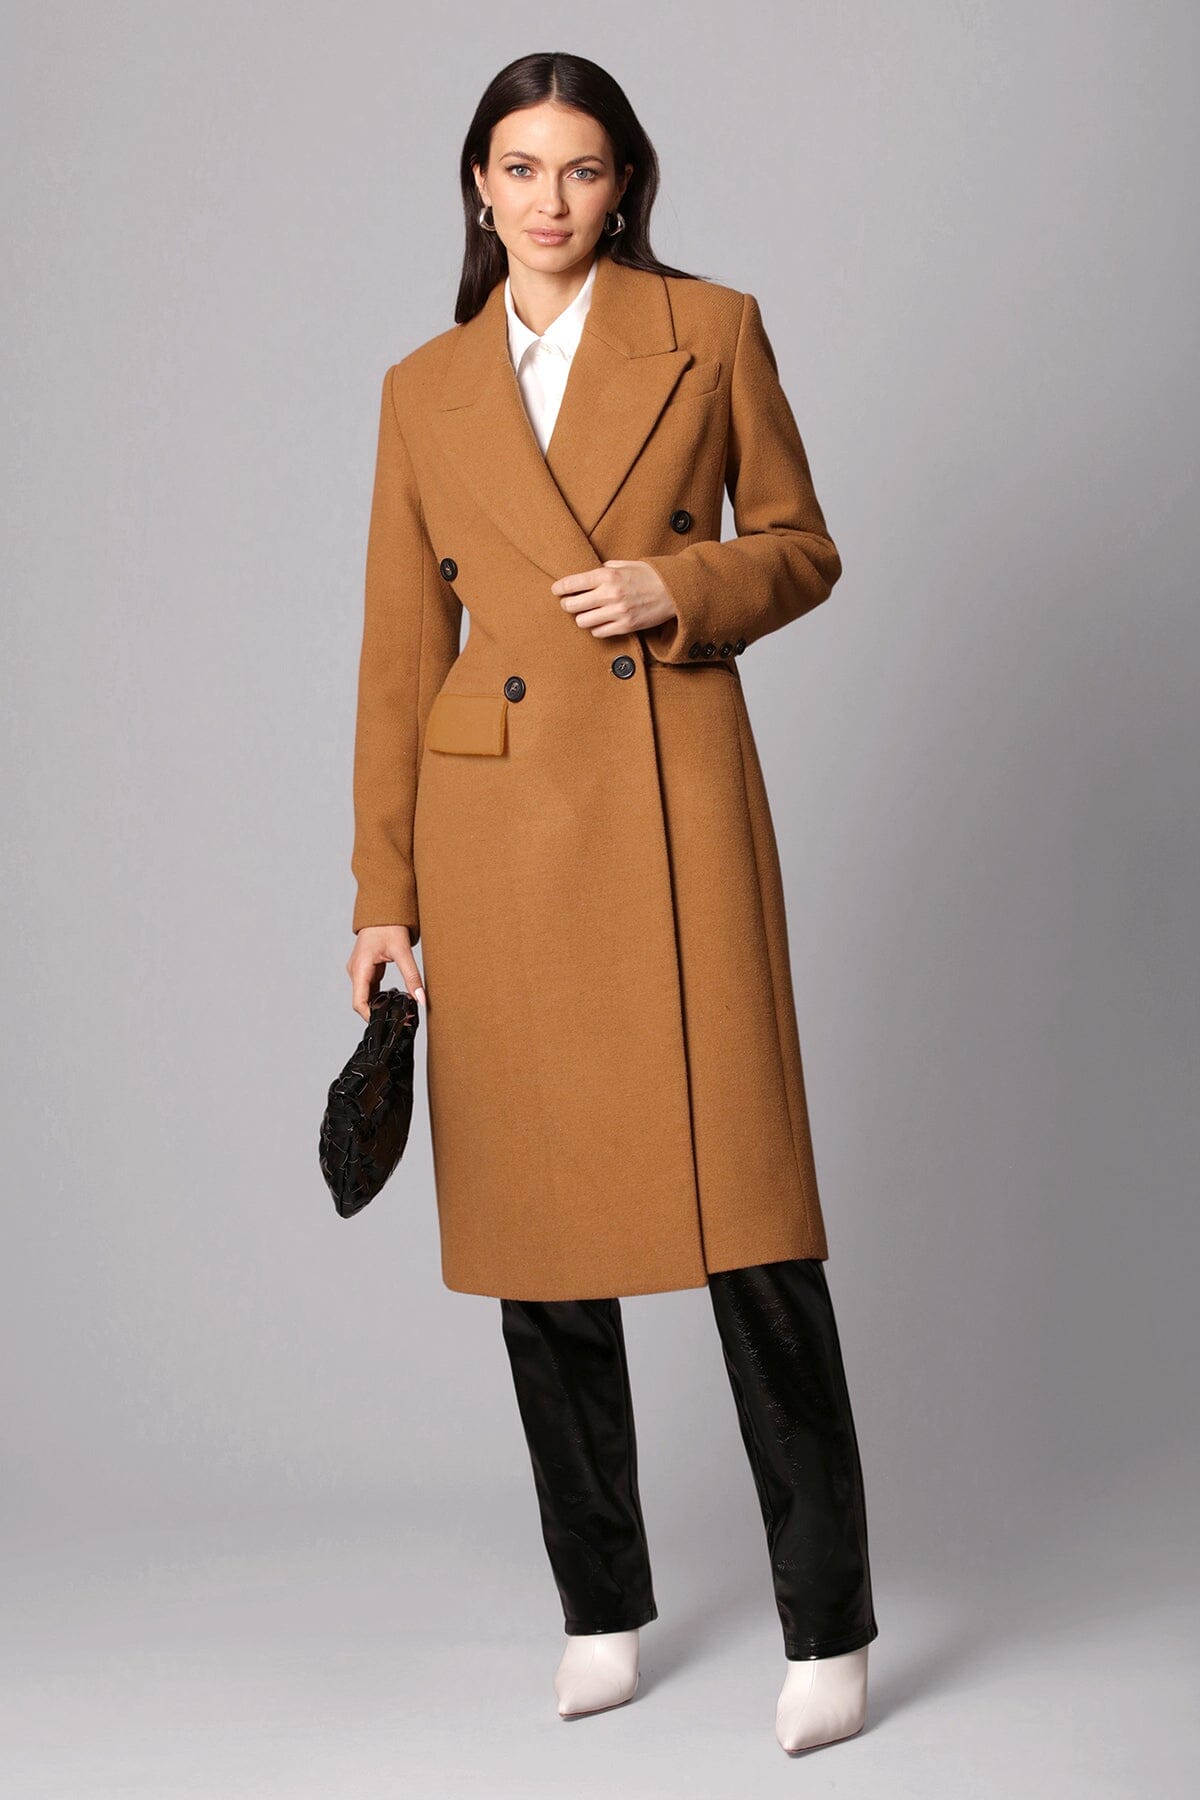 Toffee brown wool blend double breasted tailored long coat jacket - figure flattering work appropriate outerwear for women